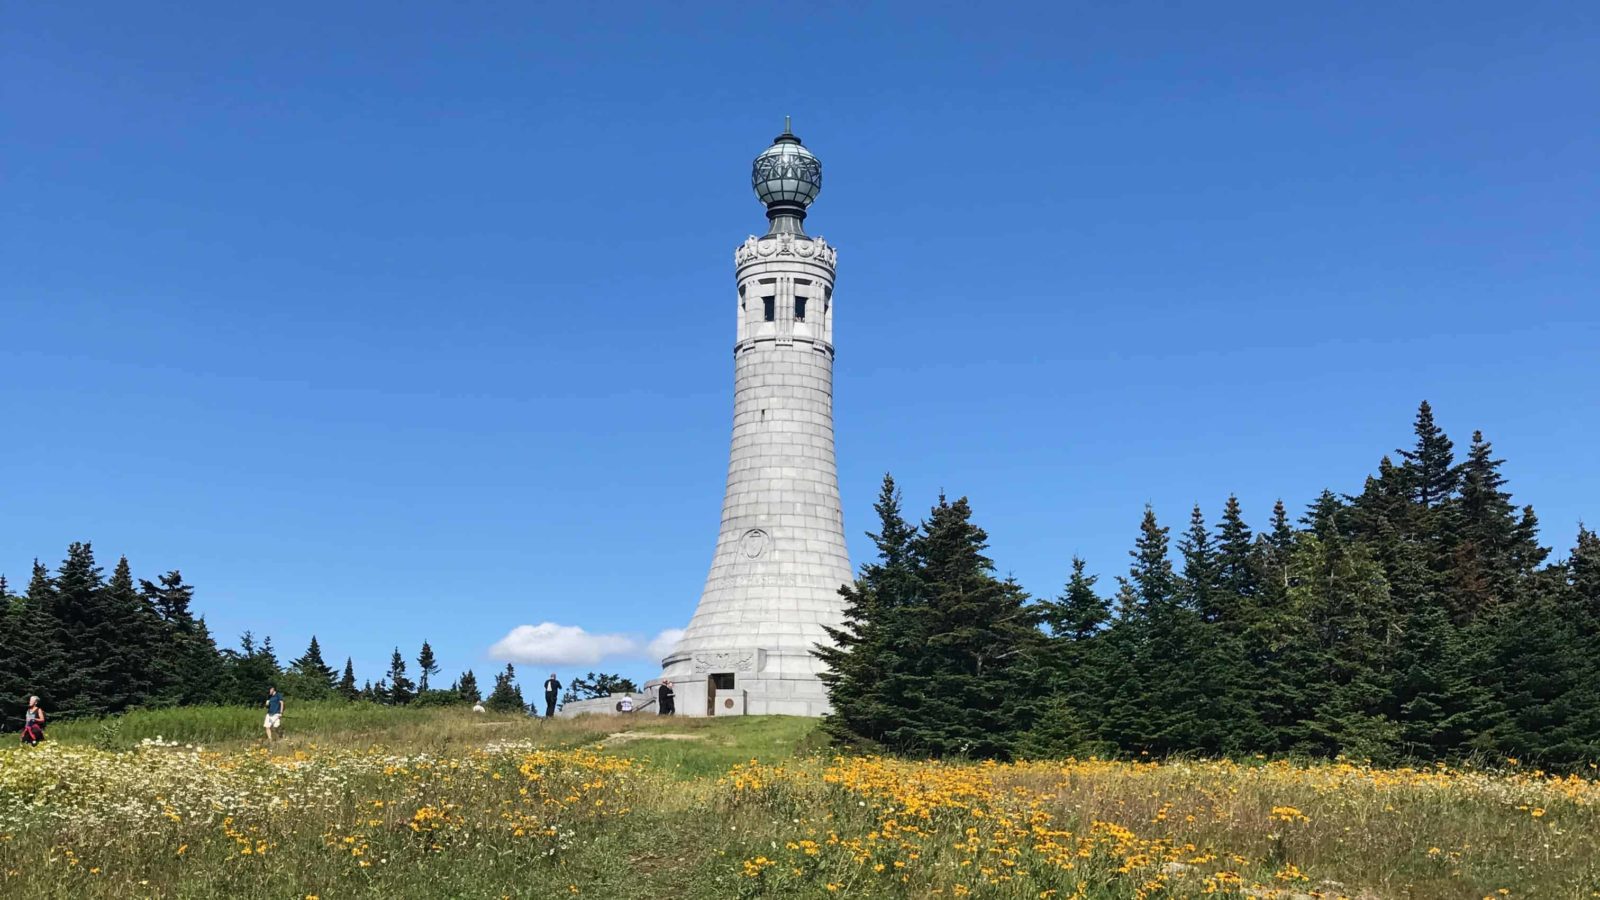 The lighthouse at the summit of Mount Greylock stands high above the meadow.